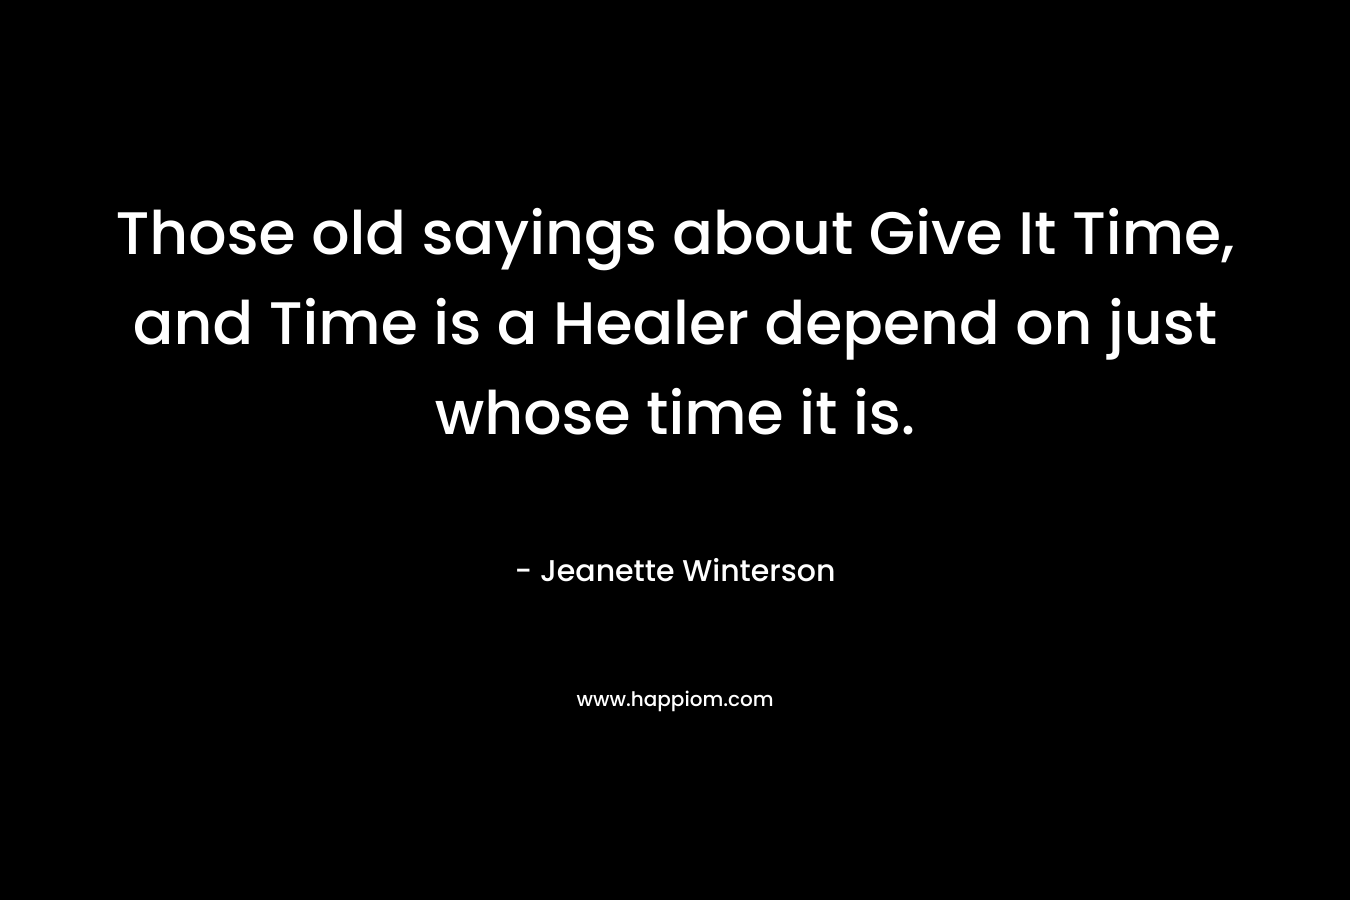 Those old sayings about Give It Time, and Time is a Healer depend on just whose time it is.